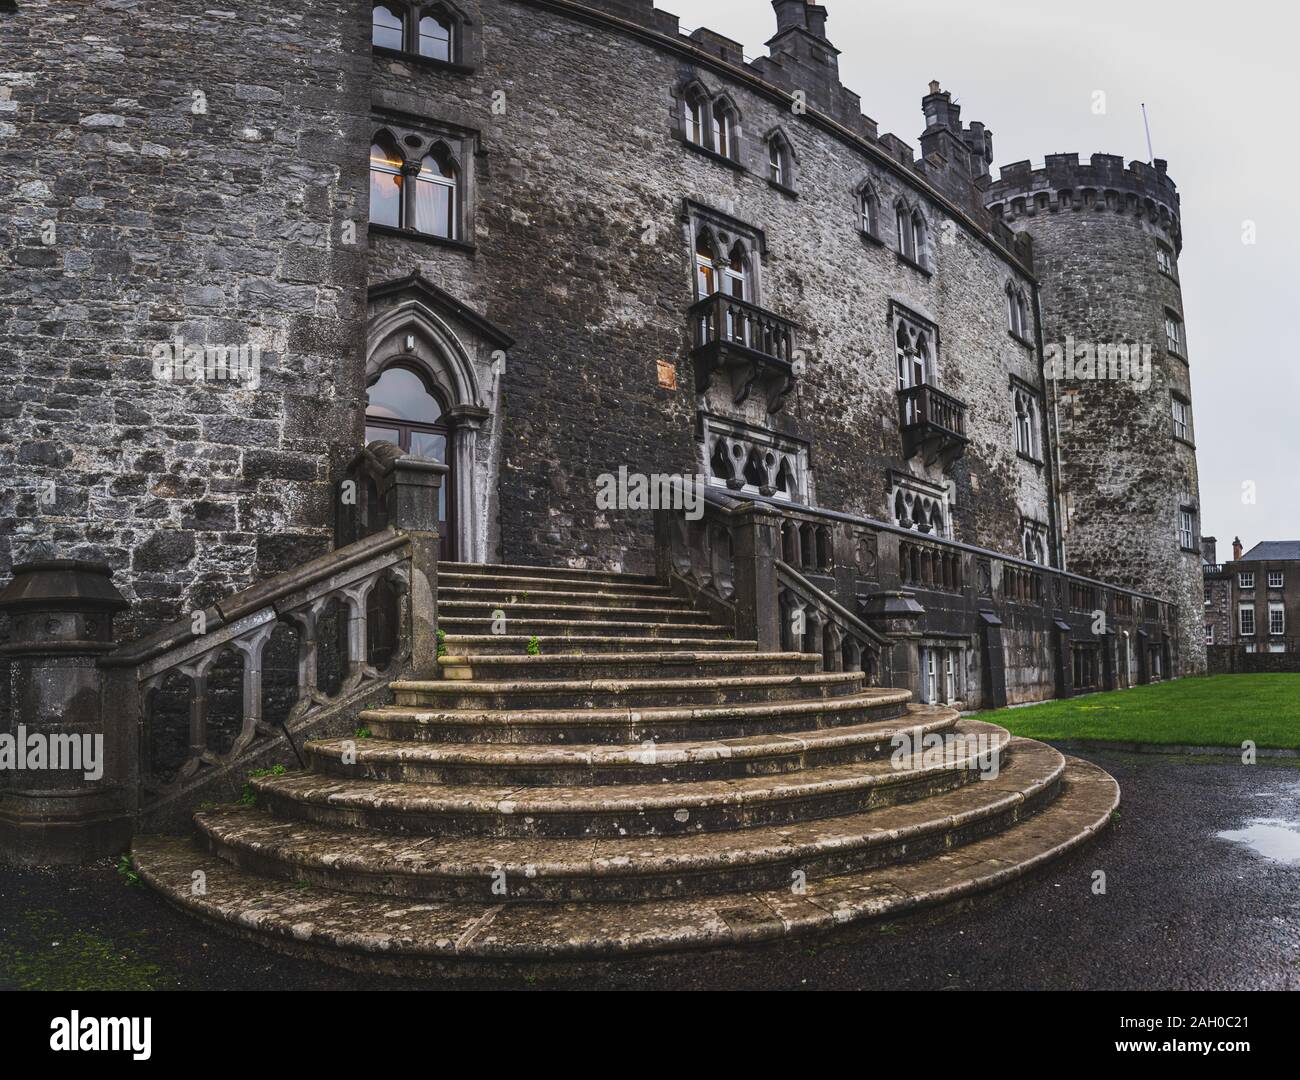 KILKENNY, IRELAND, DECEMBER 23, 2018: Panoramic view of Kilkenny Castle entrance staircase on a dramatic cloudy day. Stock Photo